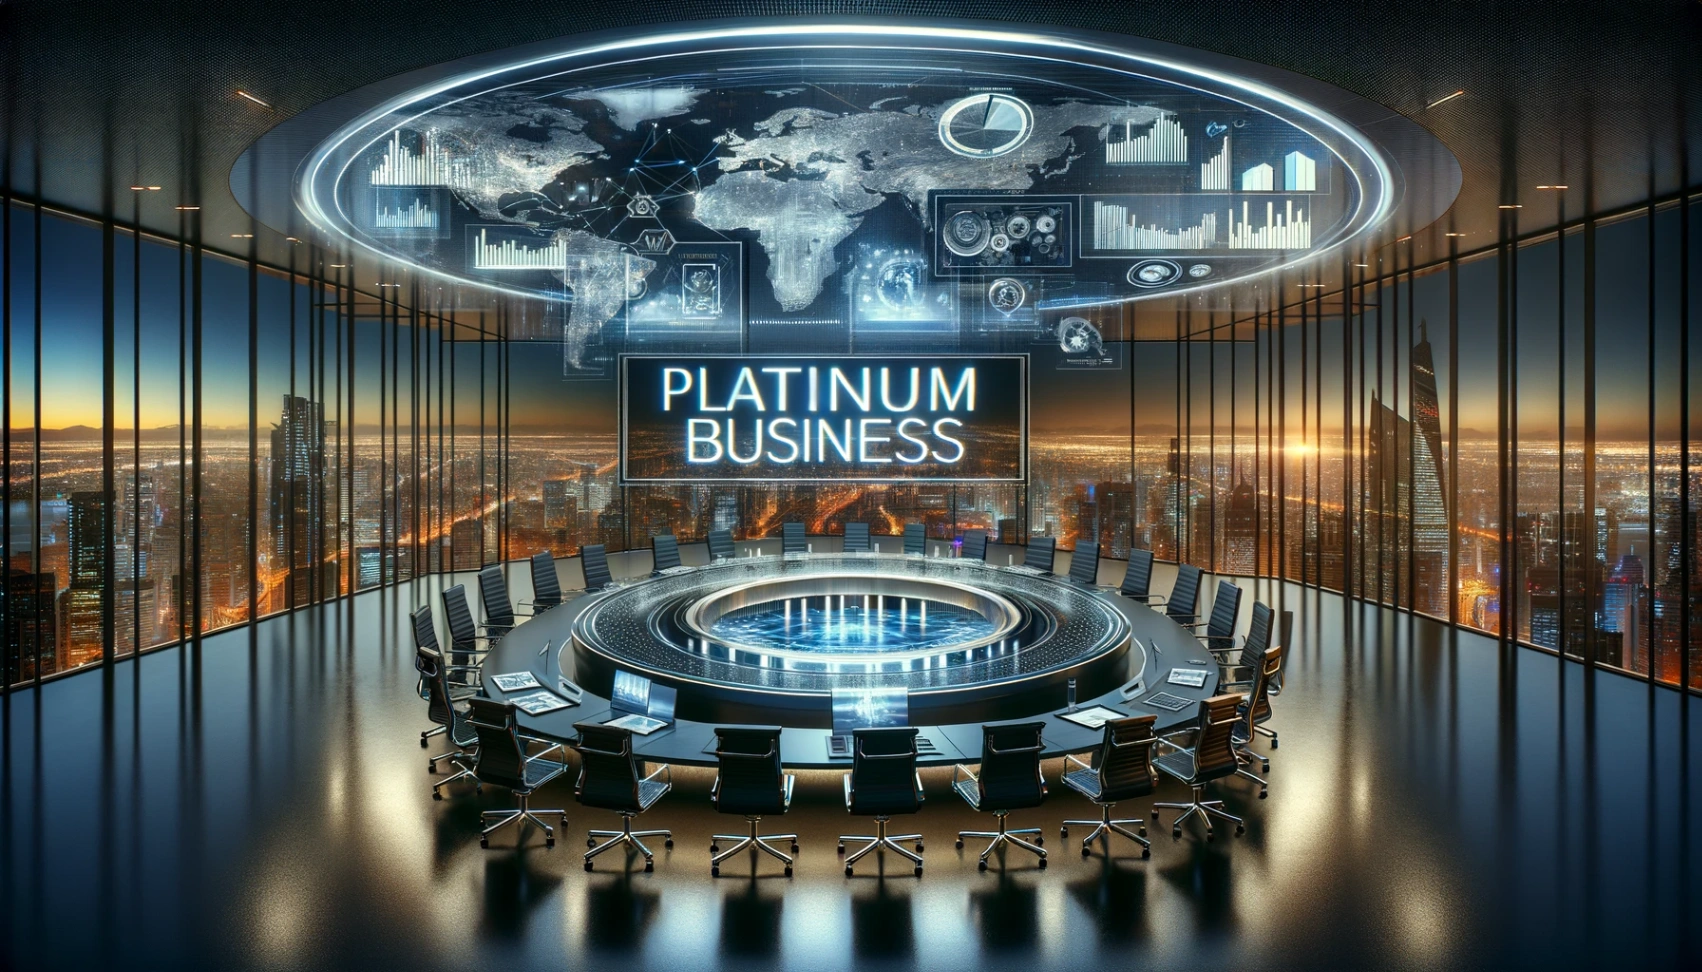 Idemitsucard - Apollostation Platinum Business: How to Apply